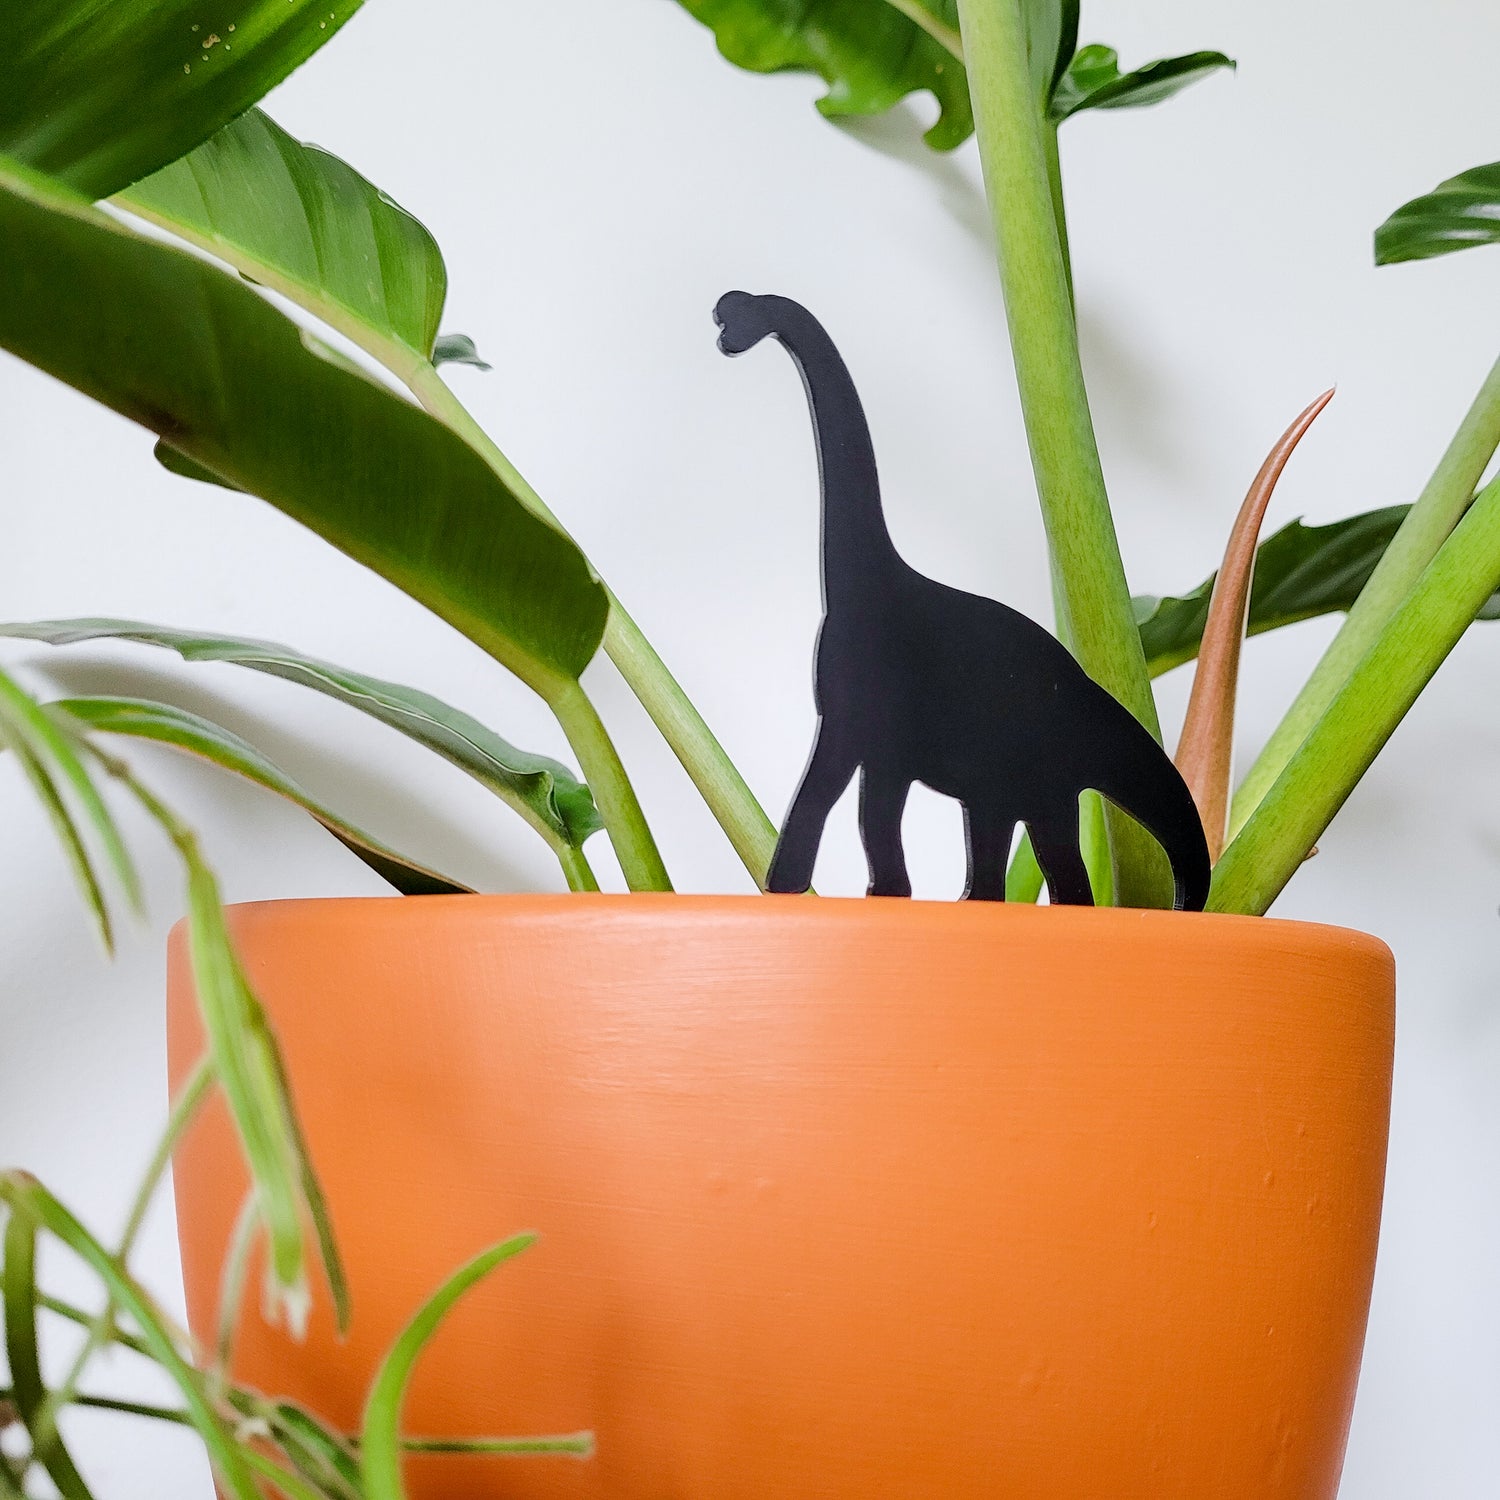 Standard size Brachiosaurus plant stake made from black acrylic displayed in an 8 inch pot with a houseplant.